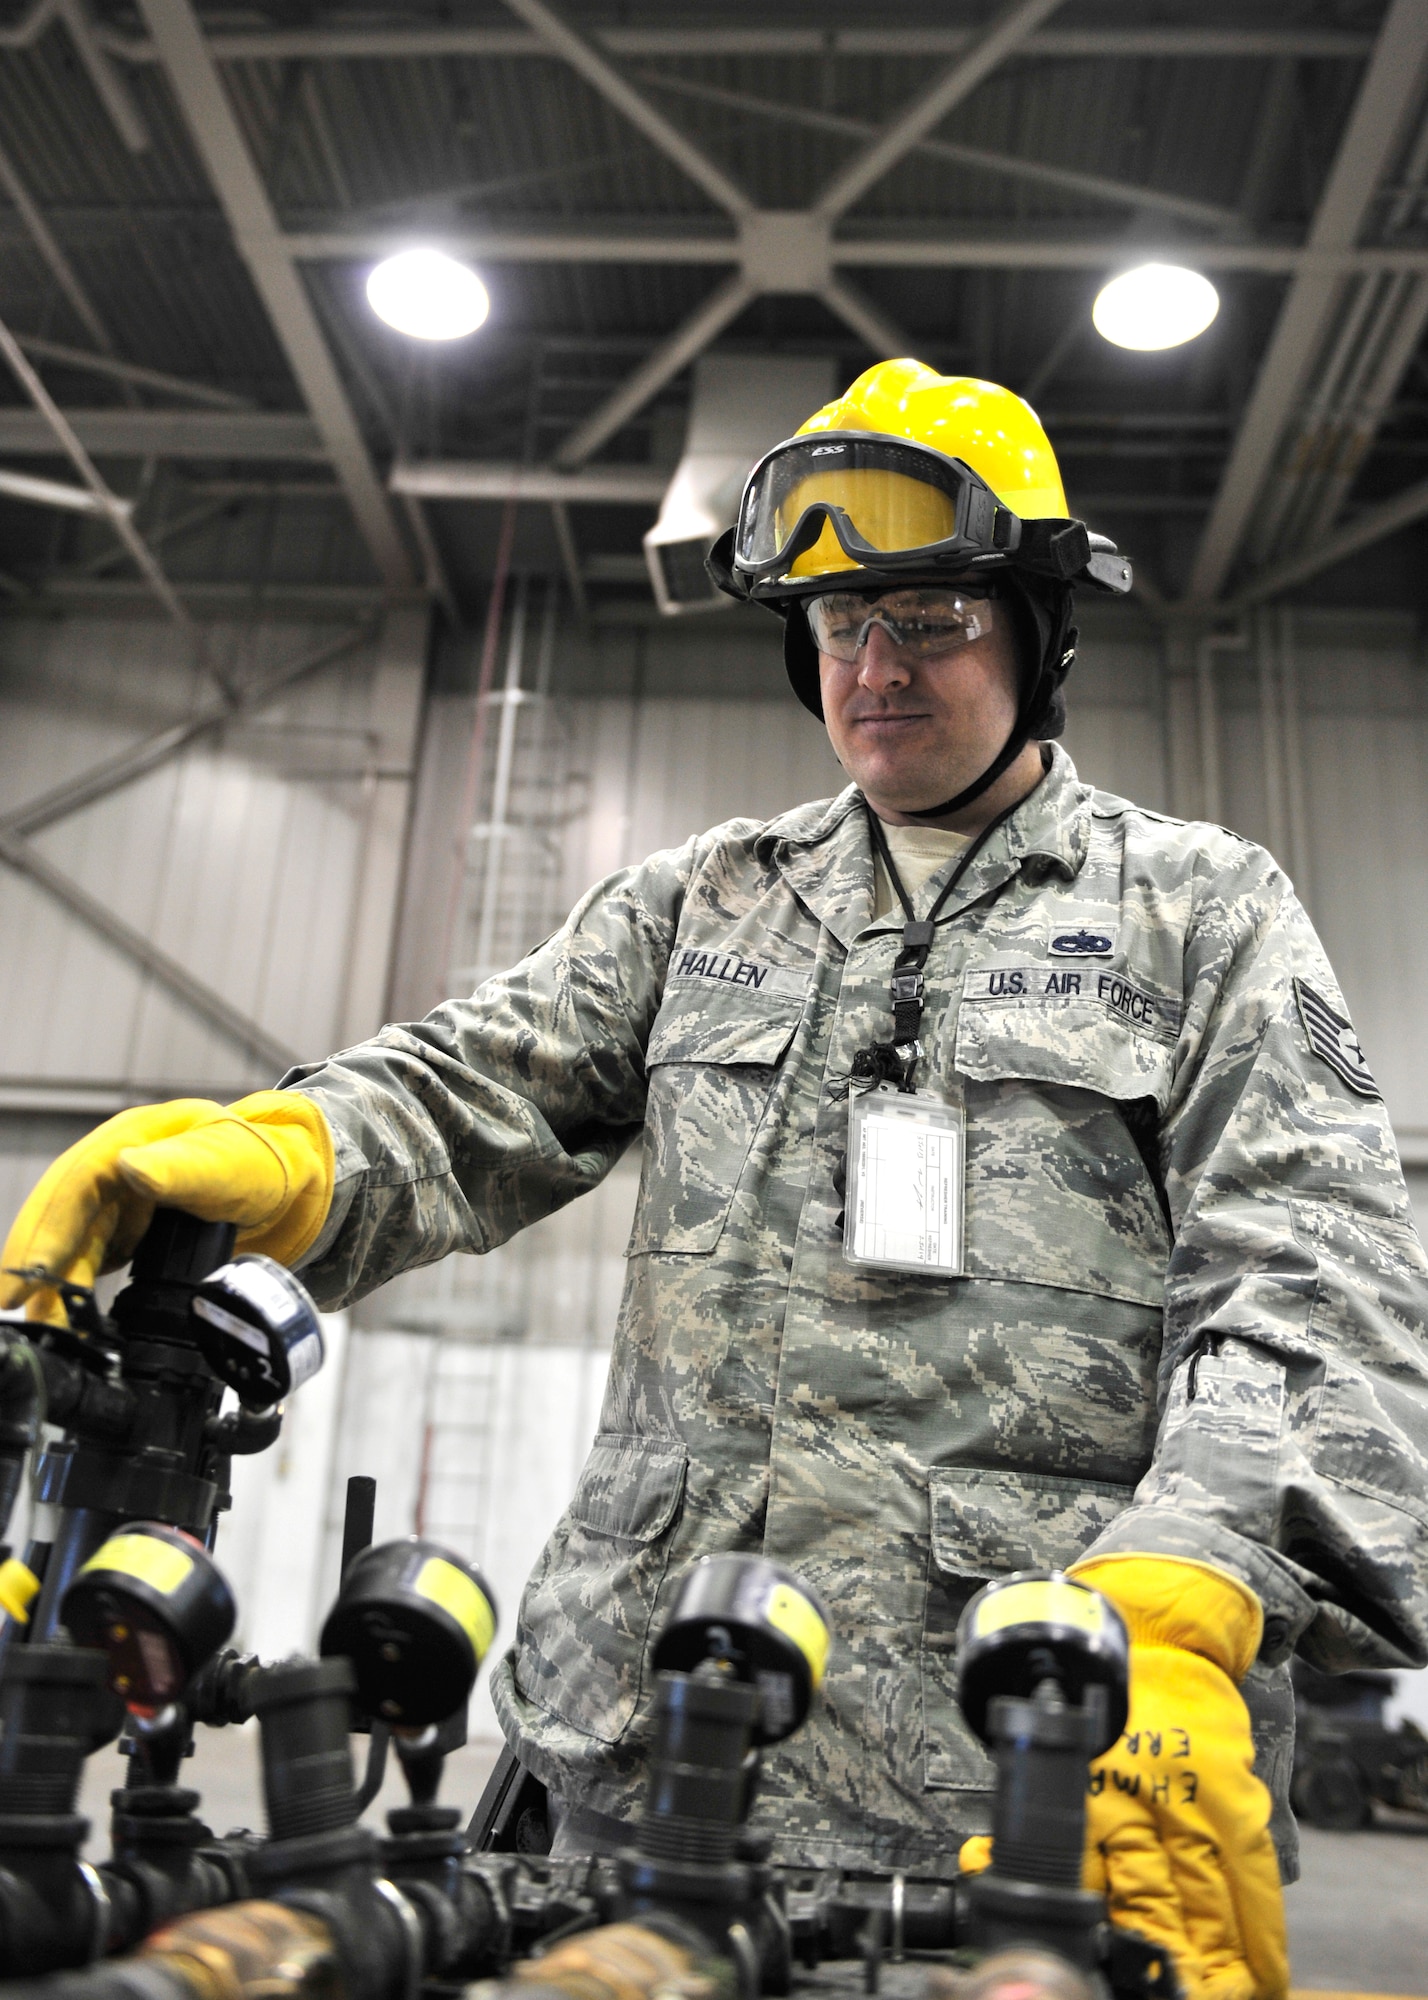 Tech Sgt. Jason Hallen, 354th Maintenance Squadron crash recovery section chief, broadens a manifold to allow for more air flow during an exercise scenario April 23, 2014, Eielson Air Force Base, Alaska. The air expanded bags that lifted an aircraft after a simulated aircraft emergency during an operational readiness exercise. (U.S. Air Force photo by Senior Airman Ashley Nicole Taylor/Released)